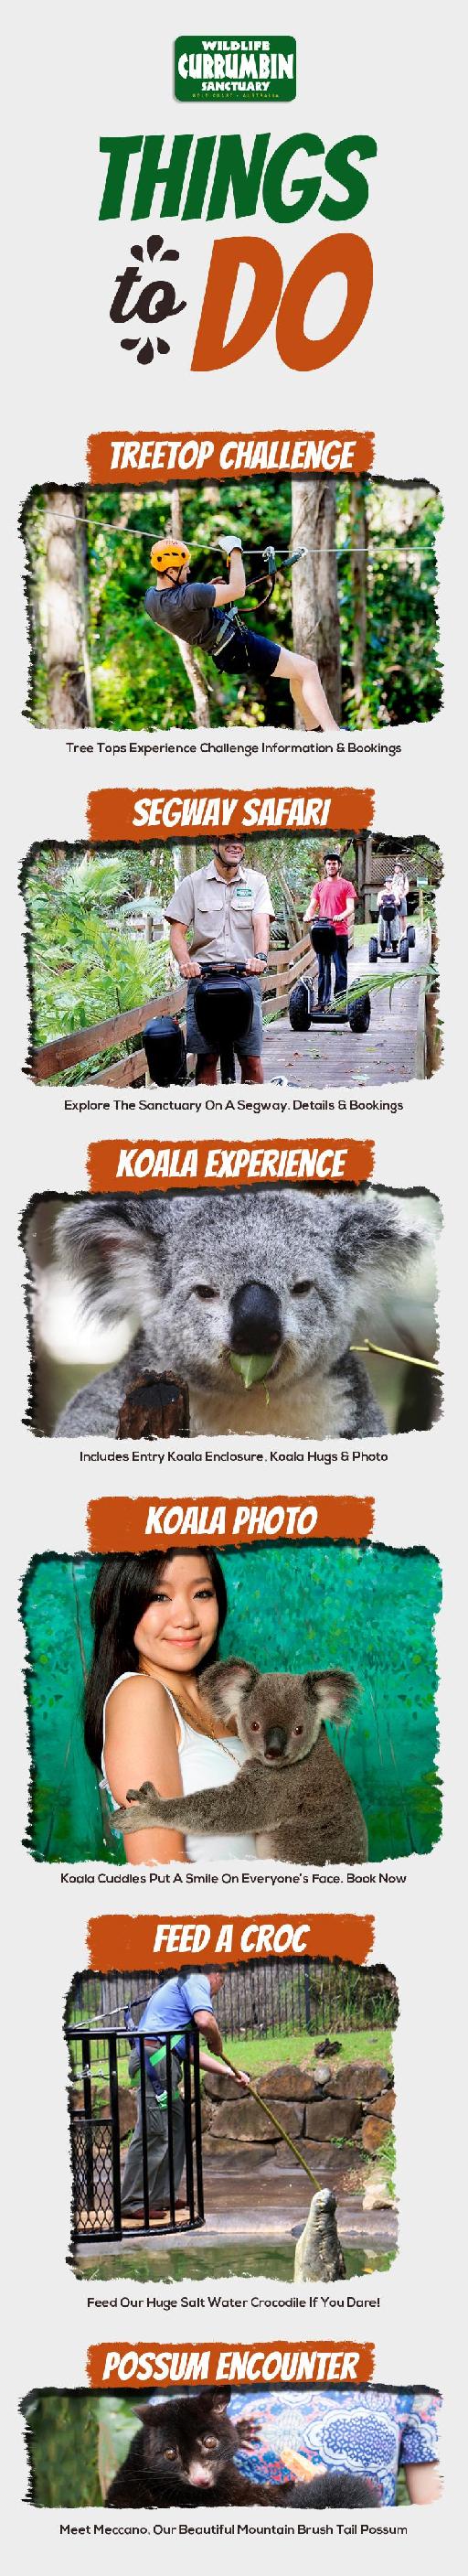 Things to do At Currumbin Wildlife Sanctuary